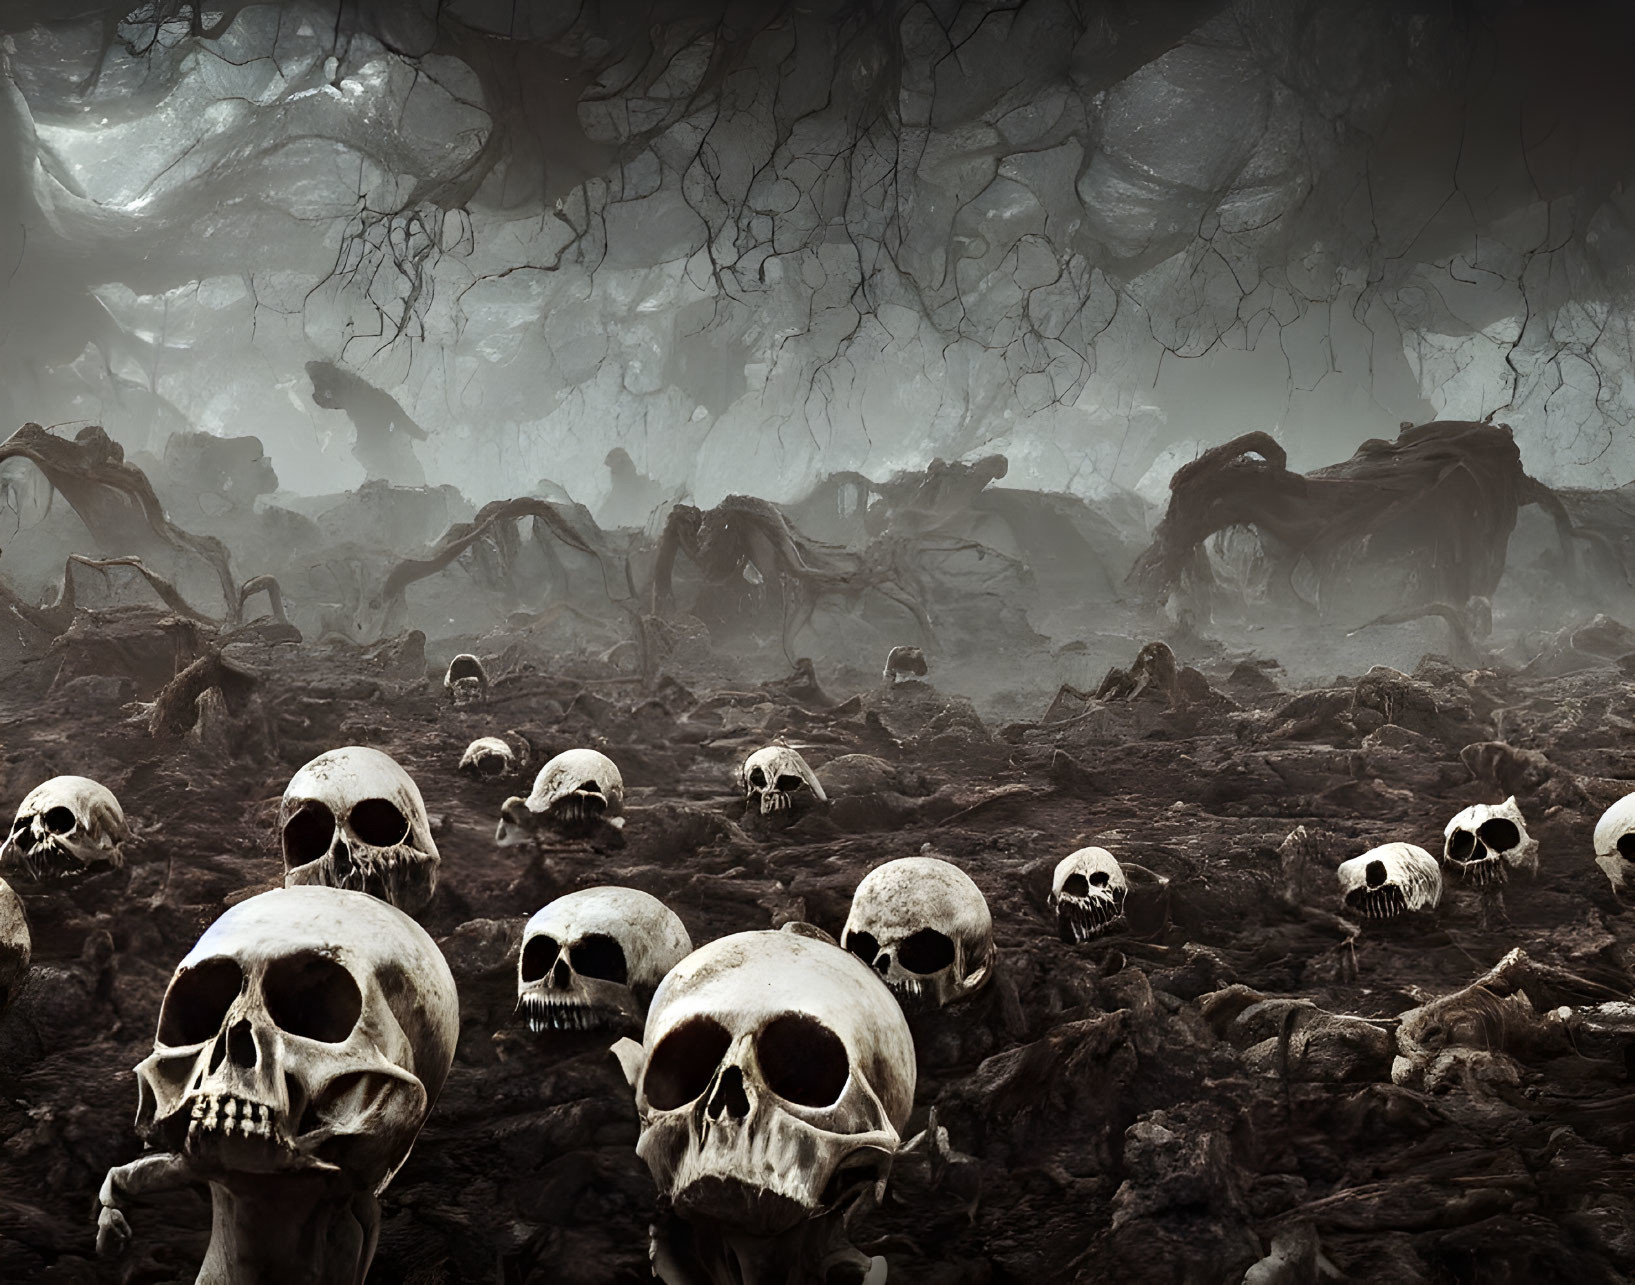 Barren Landscape with Human Skulls and Twisted Roots